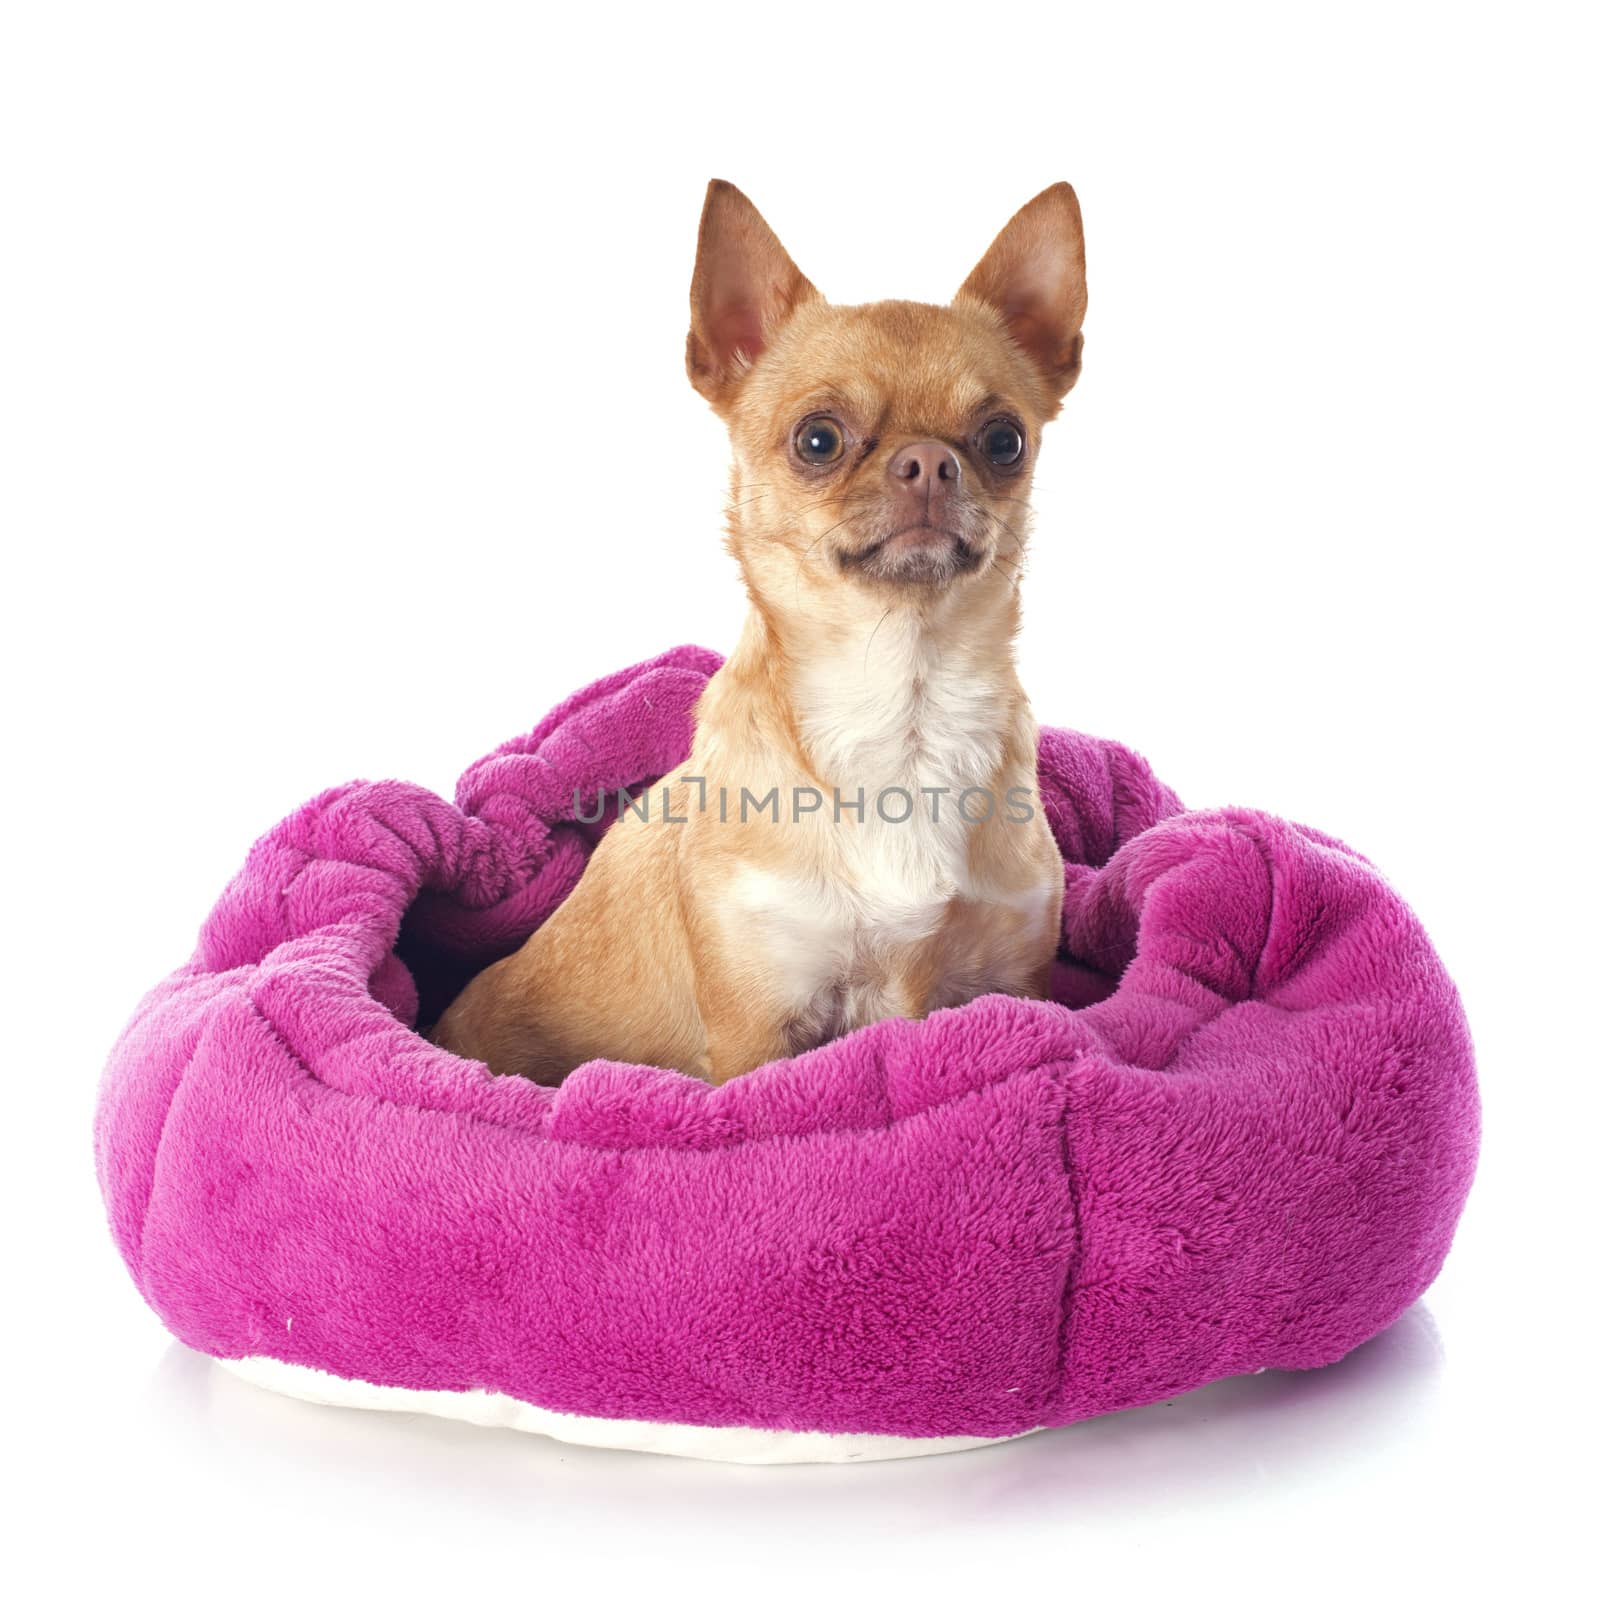 chihuahua in dog bed by cynoclub